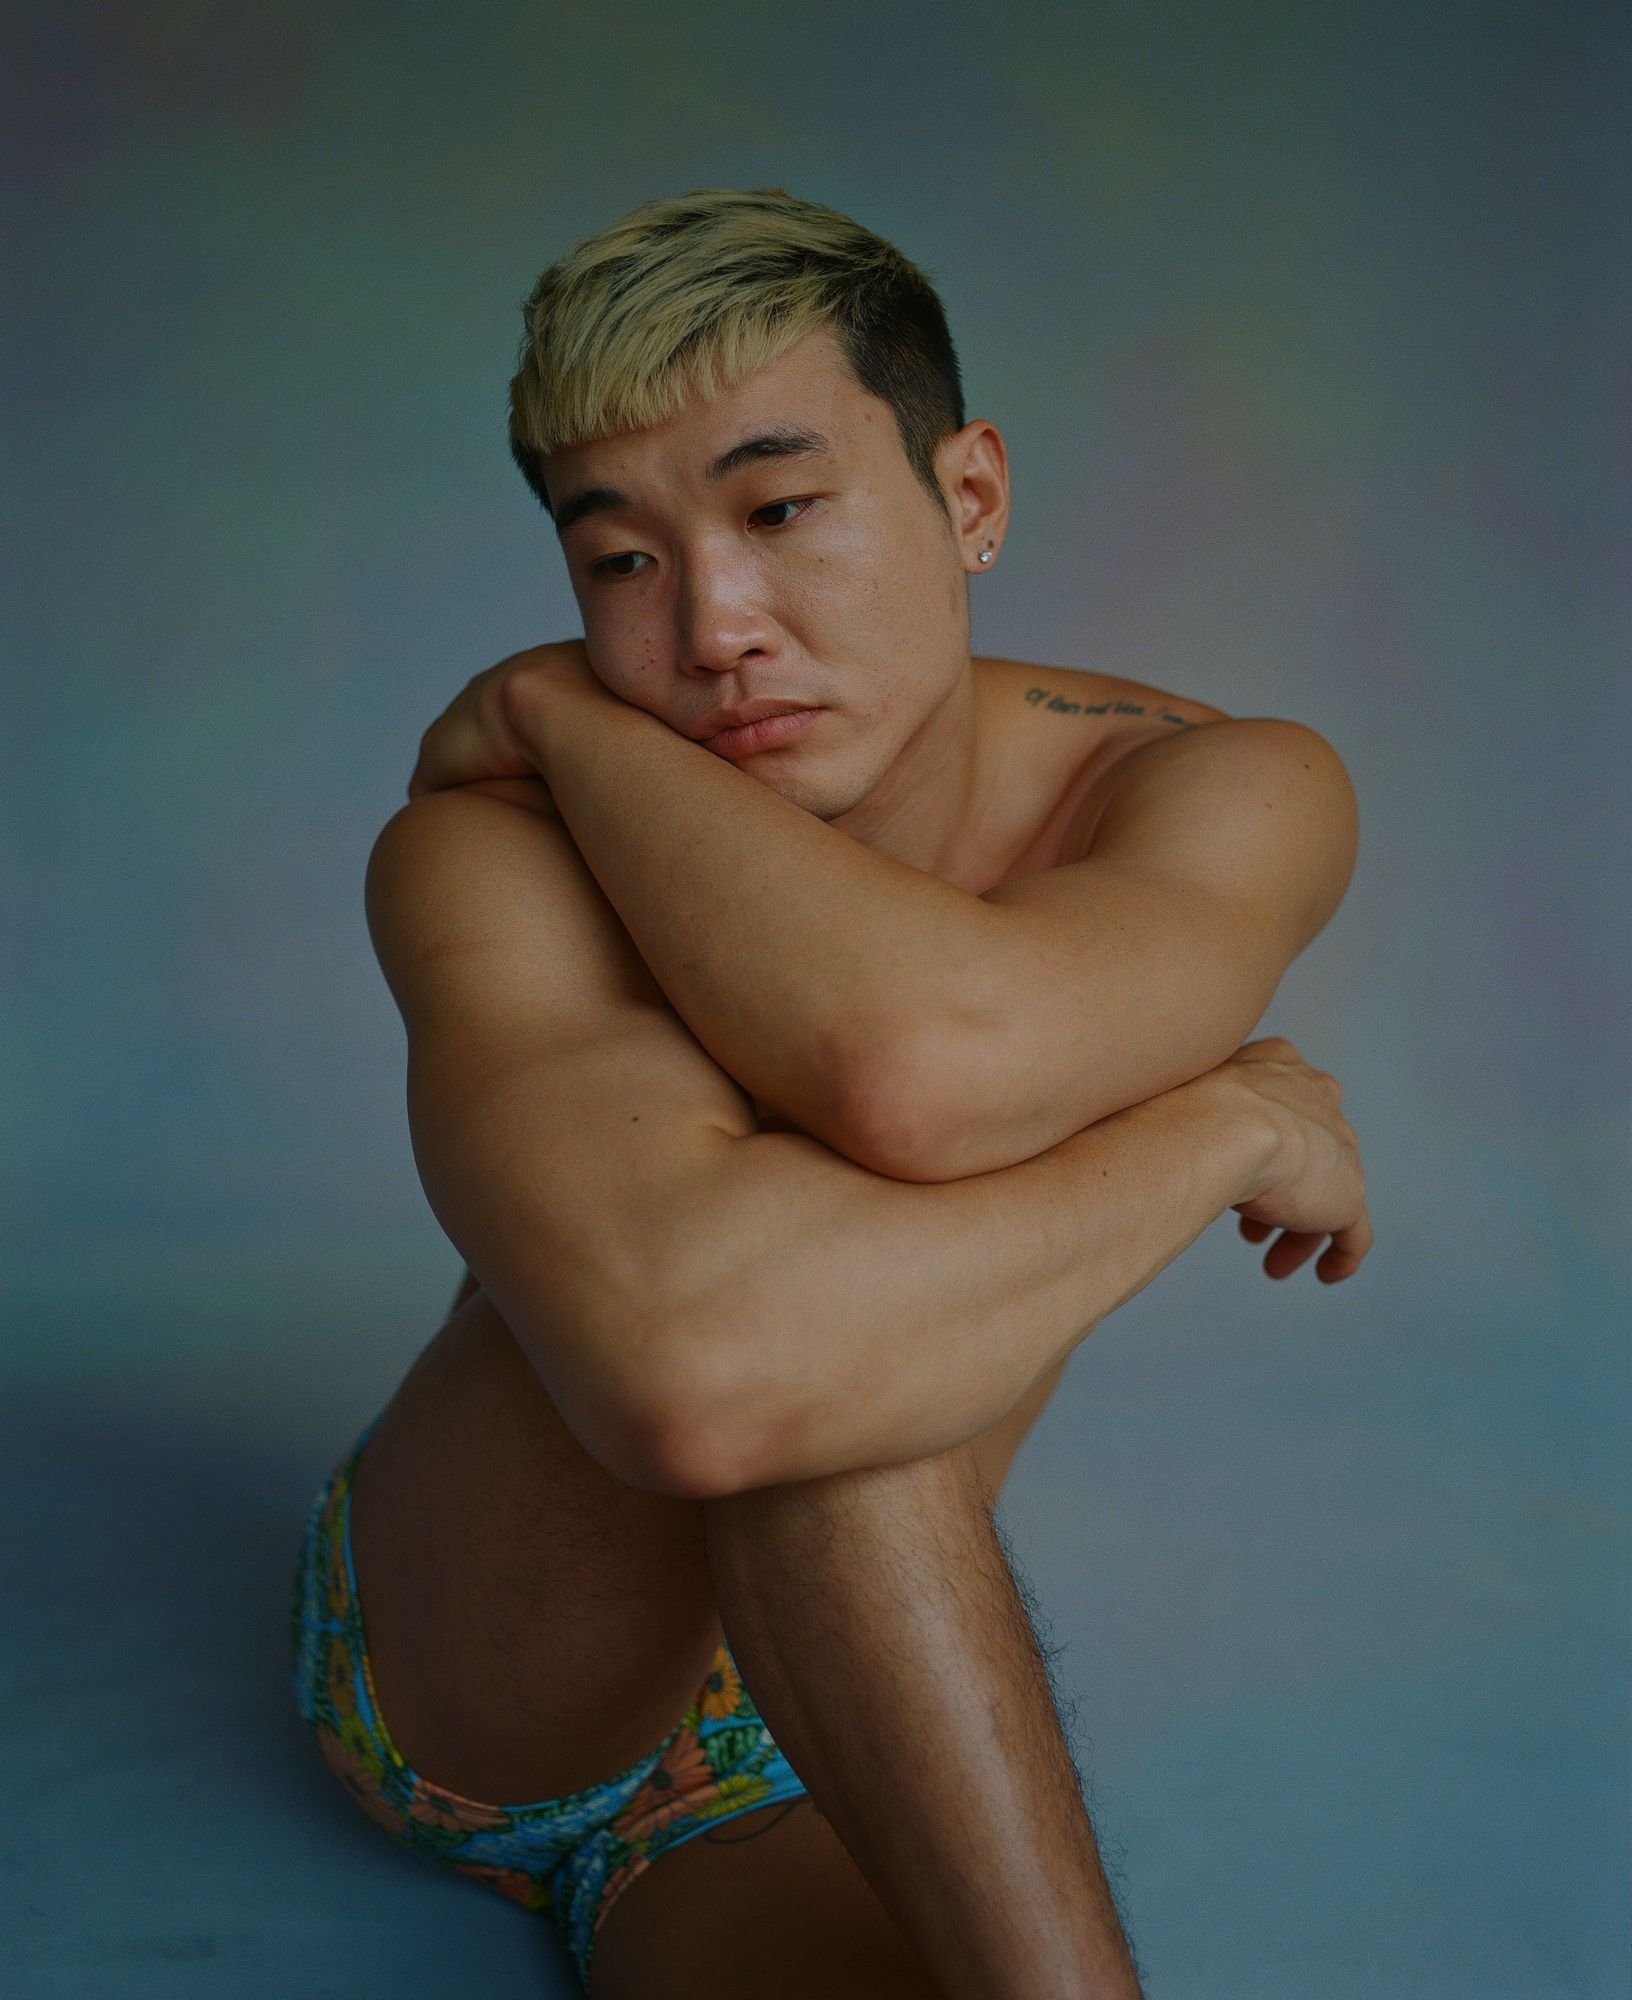 Koeal Sex Video - Joel Kim Booster Is So Hot Right Now